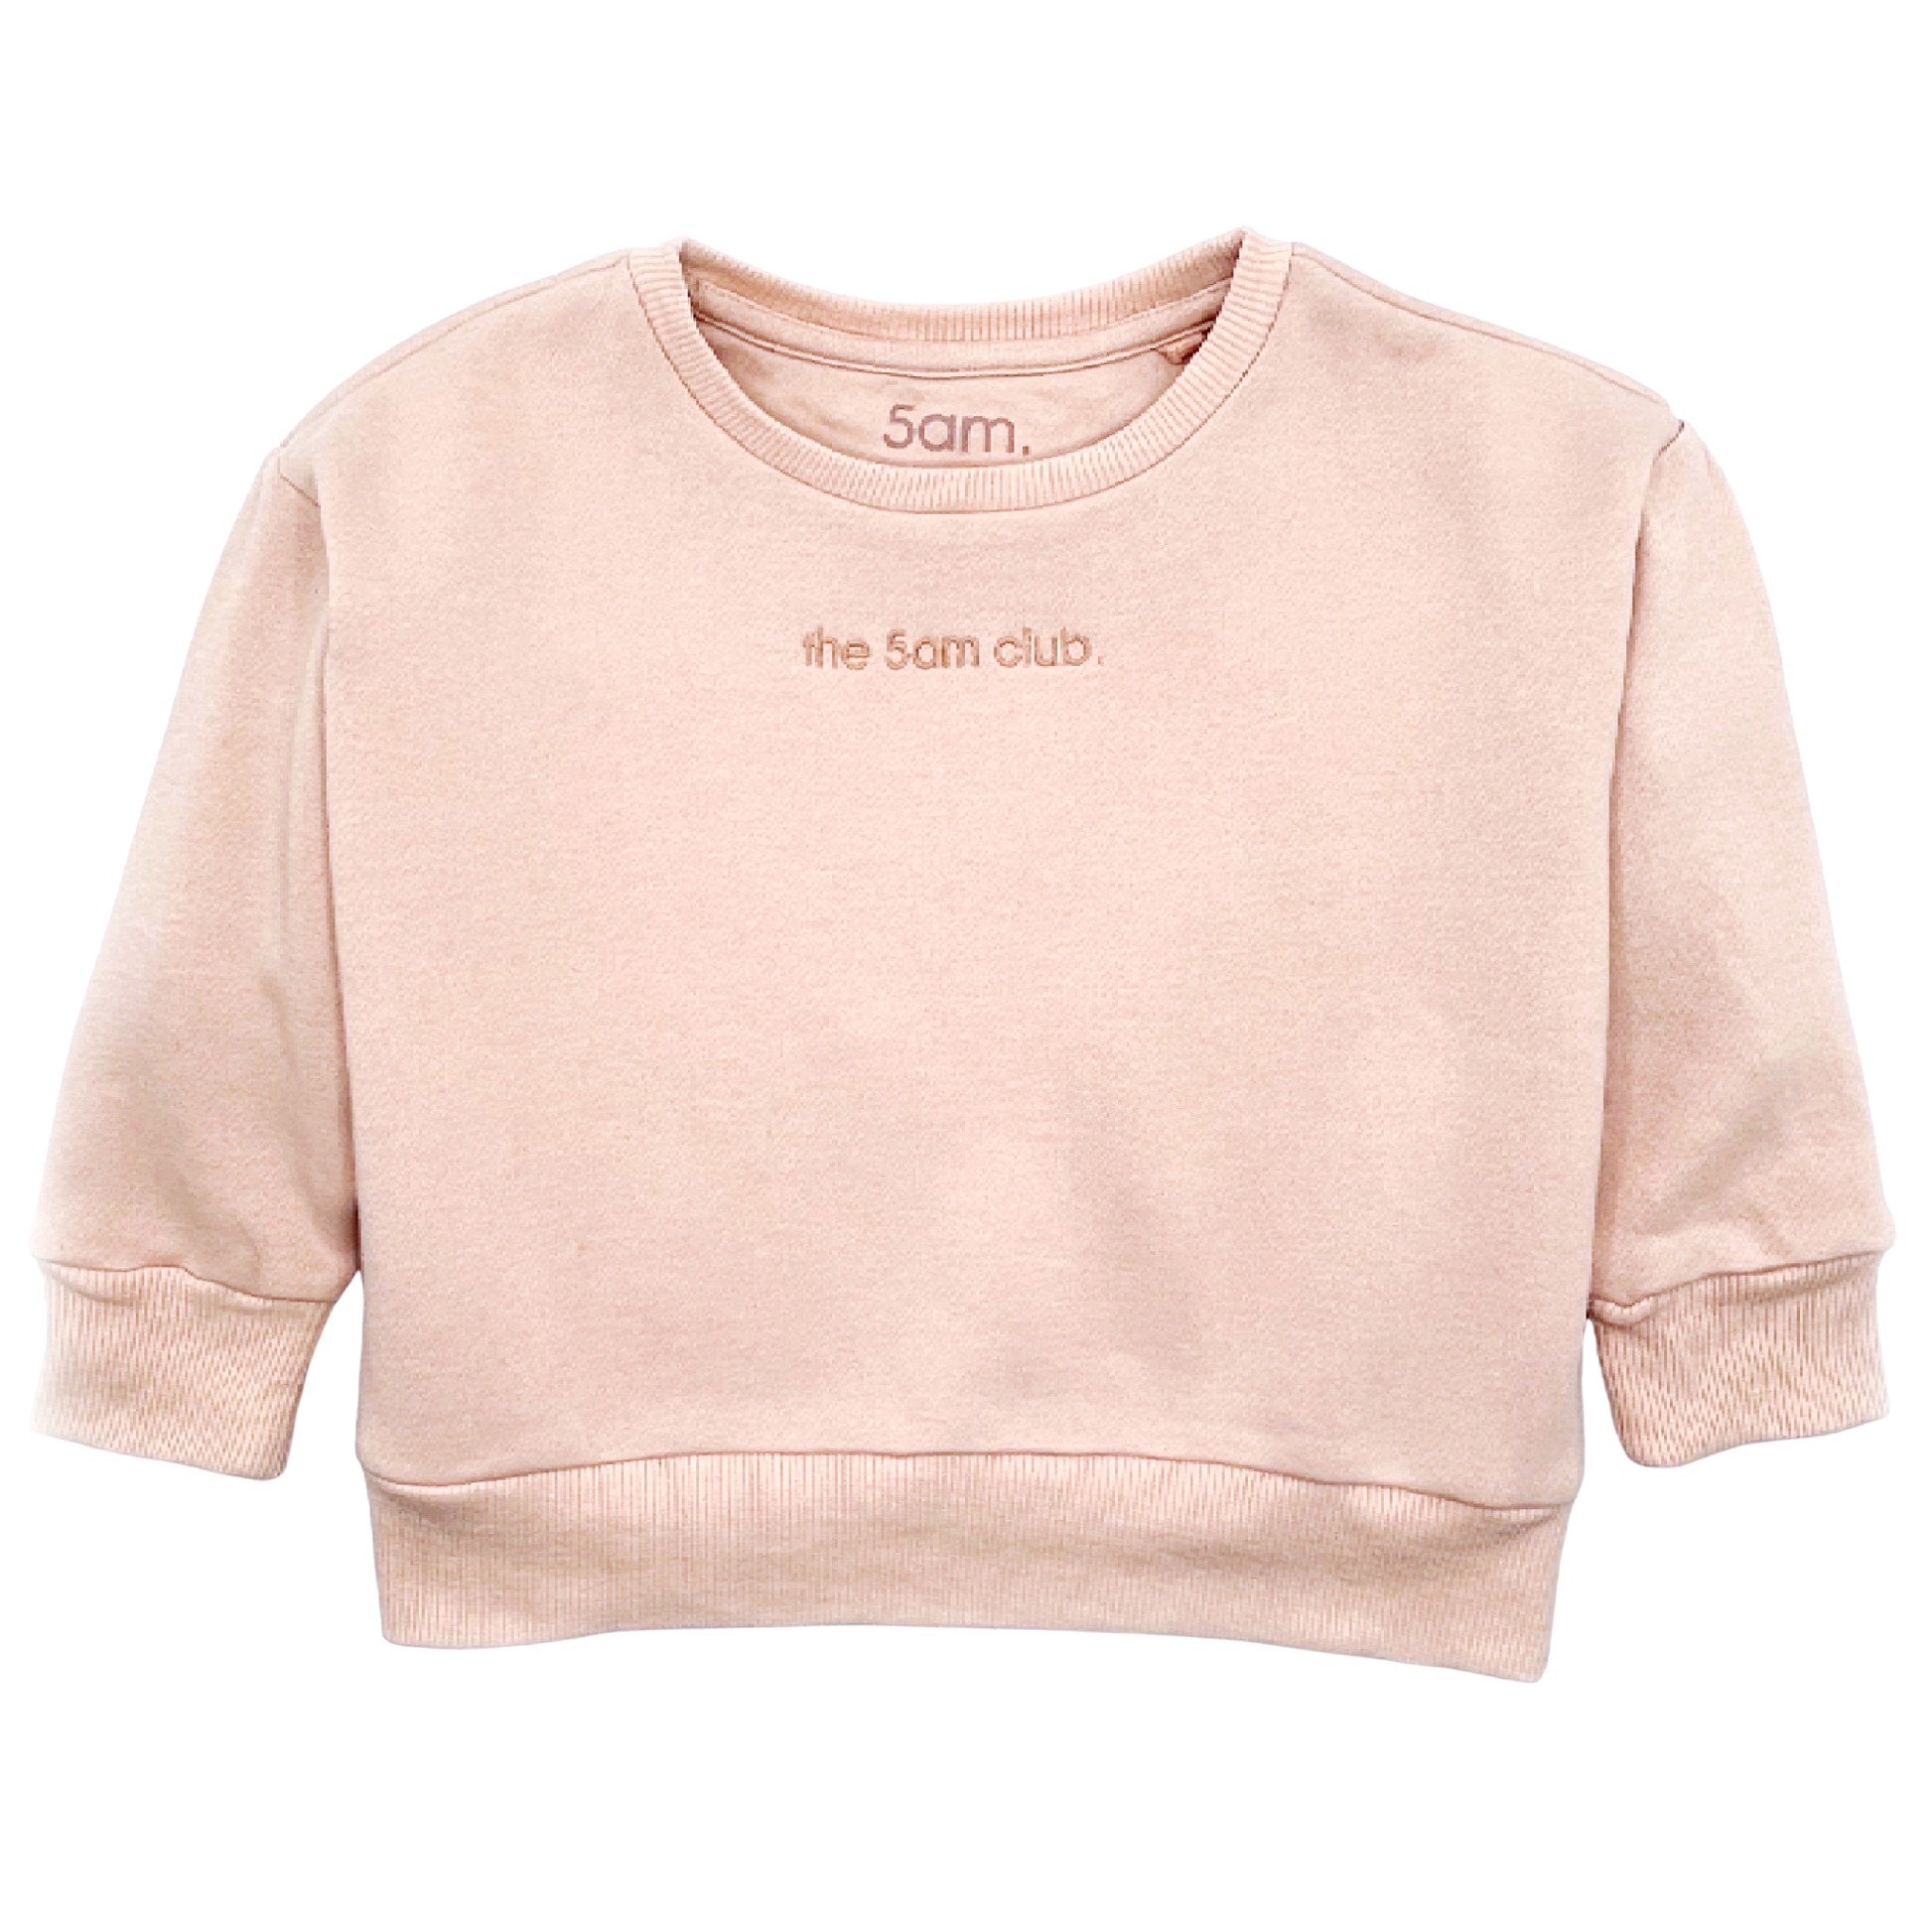 blush pink kids sweatshirt with the 5am club logo on the chest